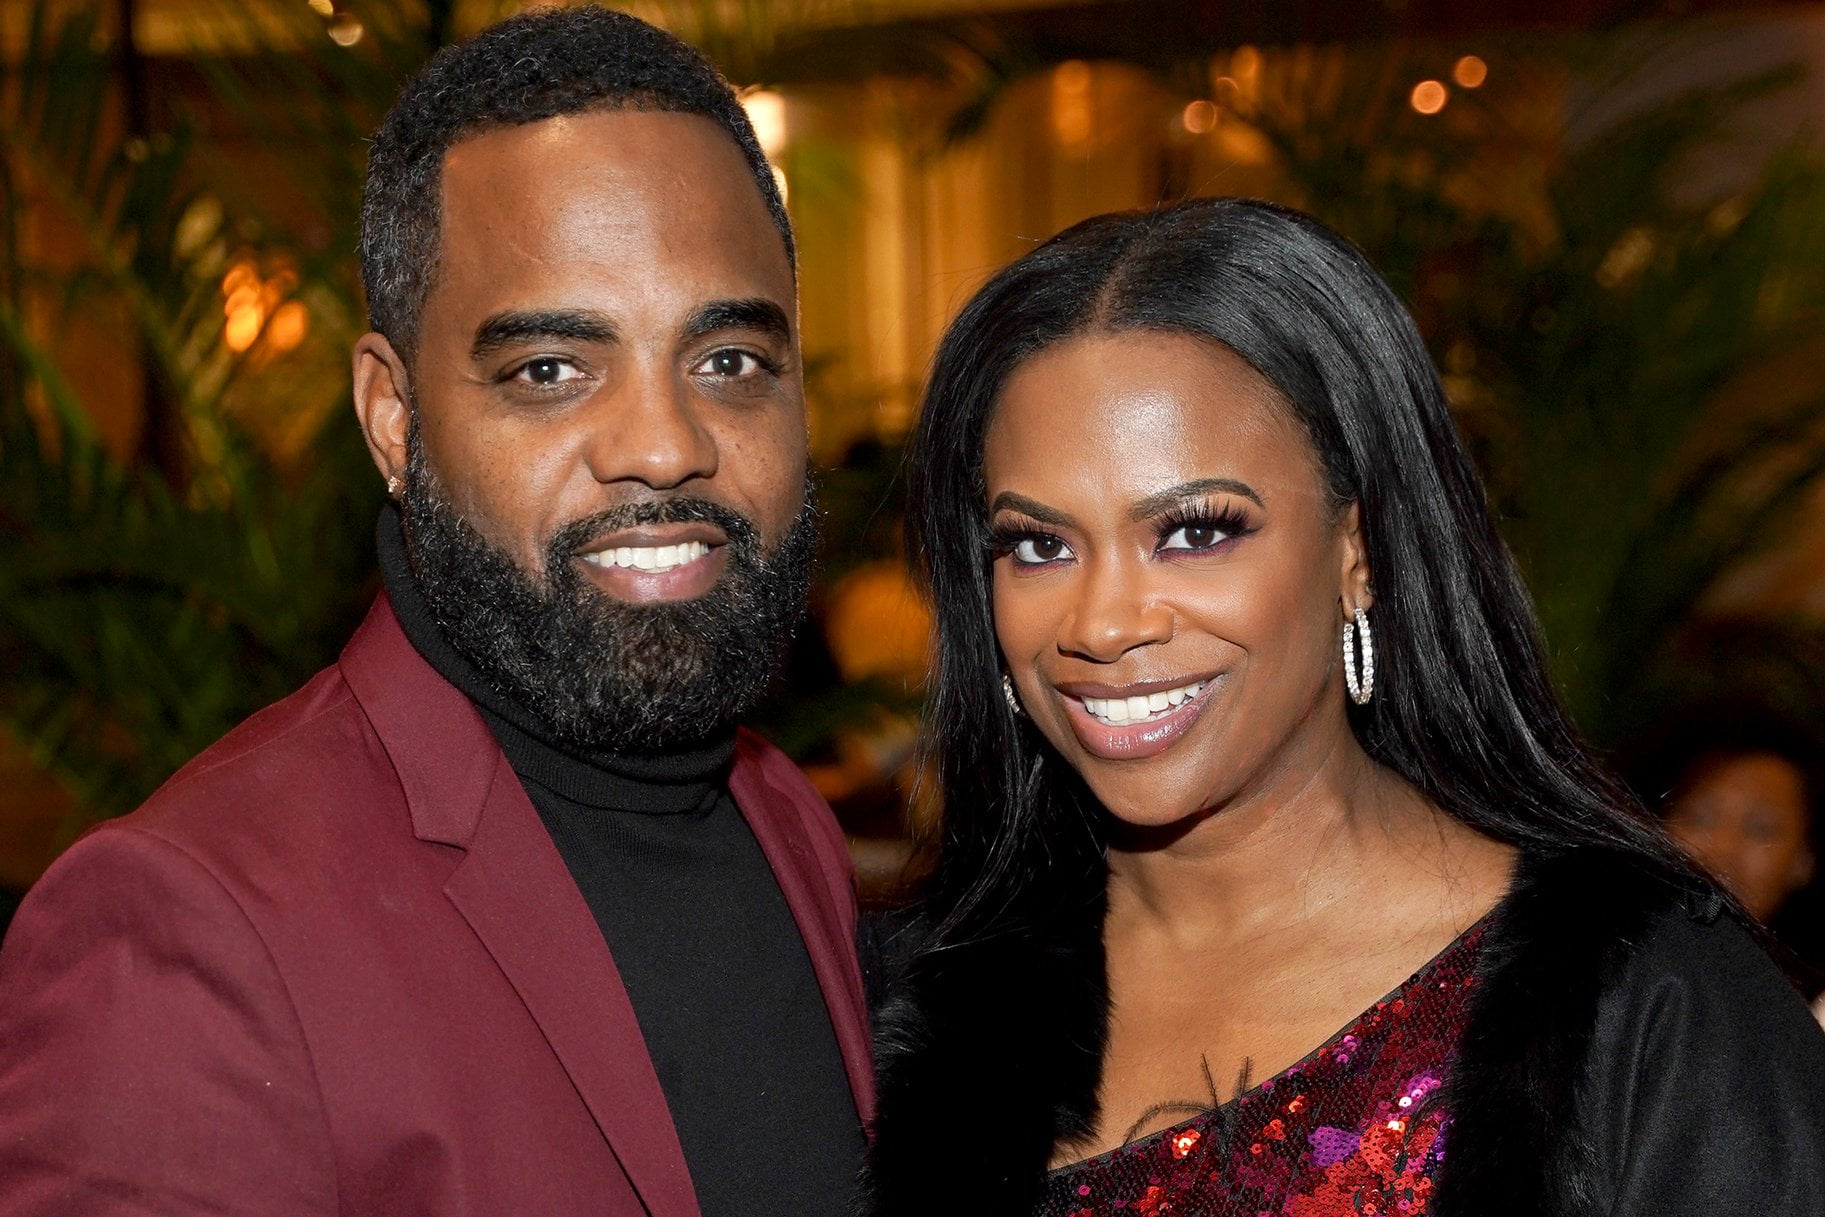 Kandi Burruss And Todd Tucker Vote Together - See The Video And Hear Their Message!